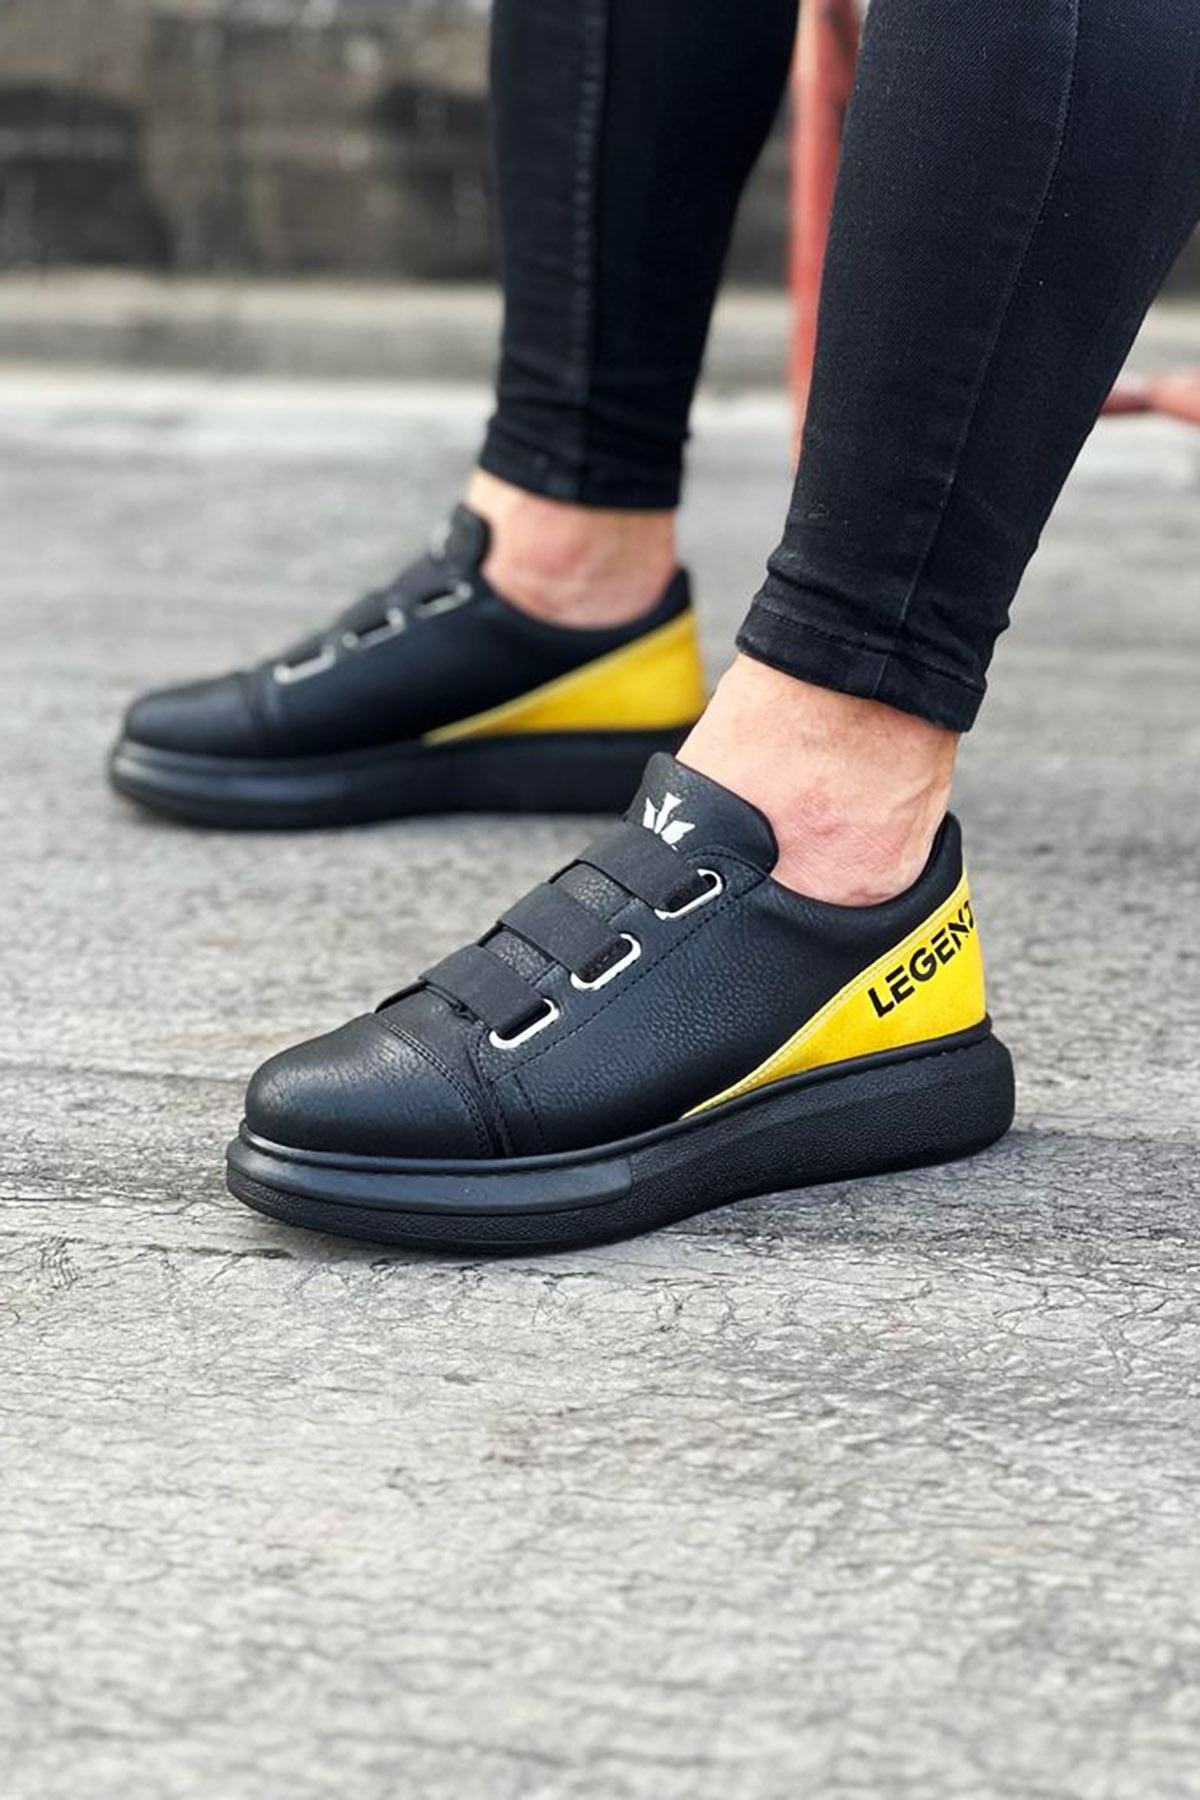 WG029 3 Stripes Legend Charcoal Yellow Thick Sole Casual Men's Shoes - STREETMODE™